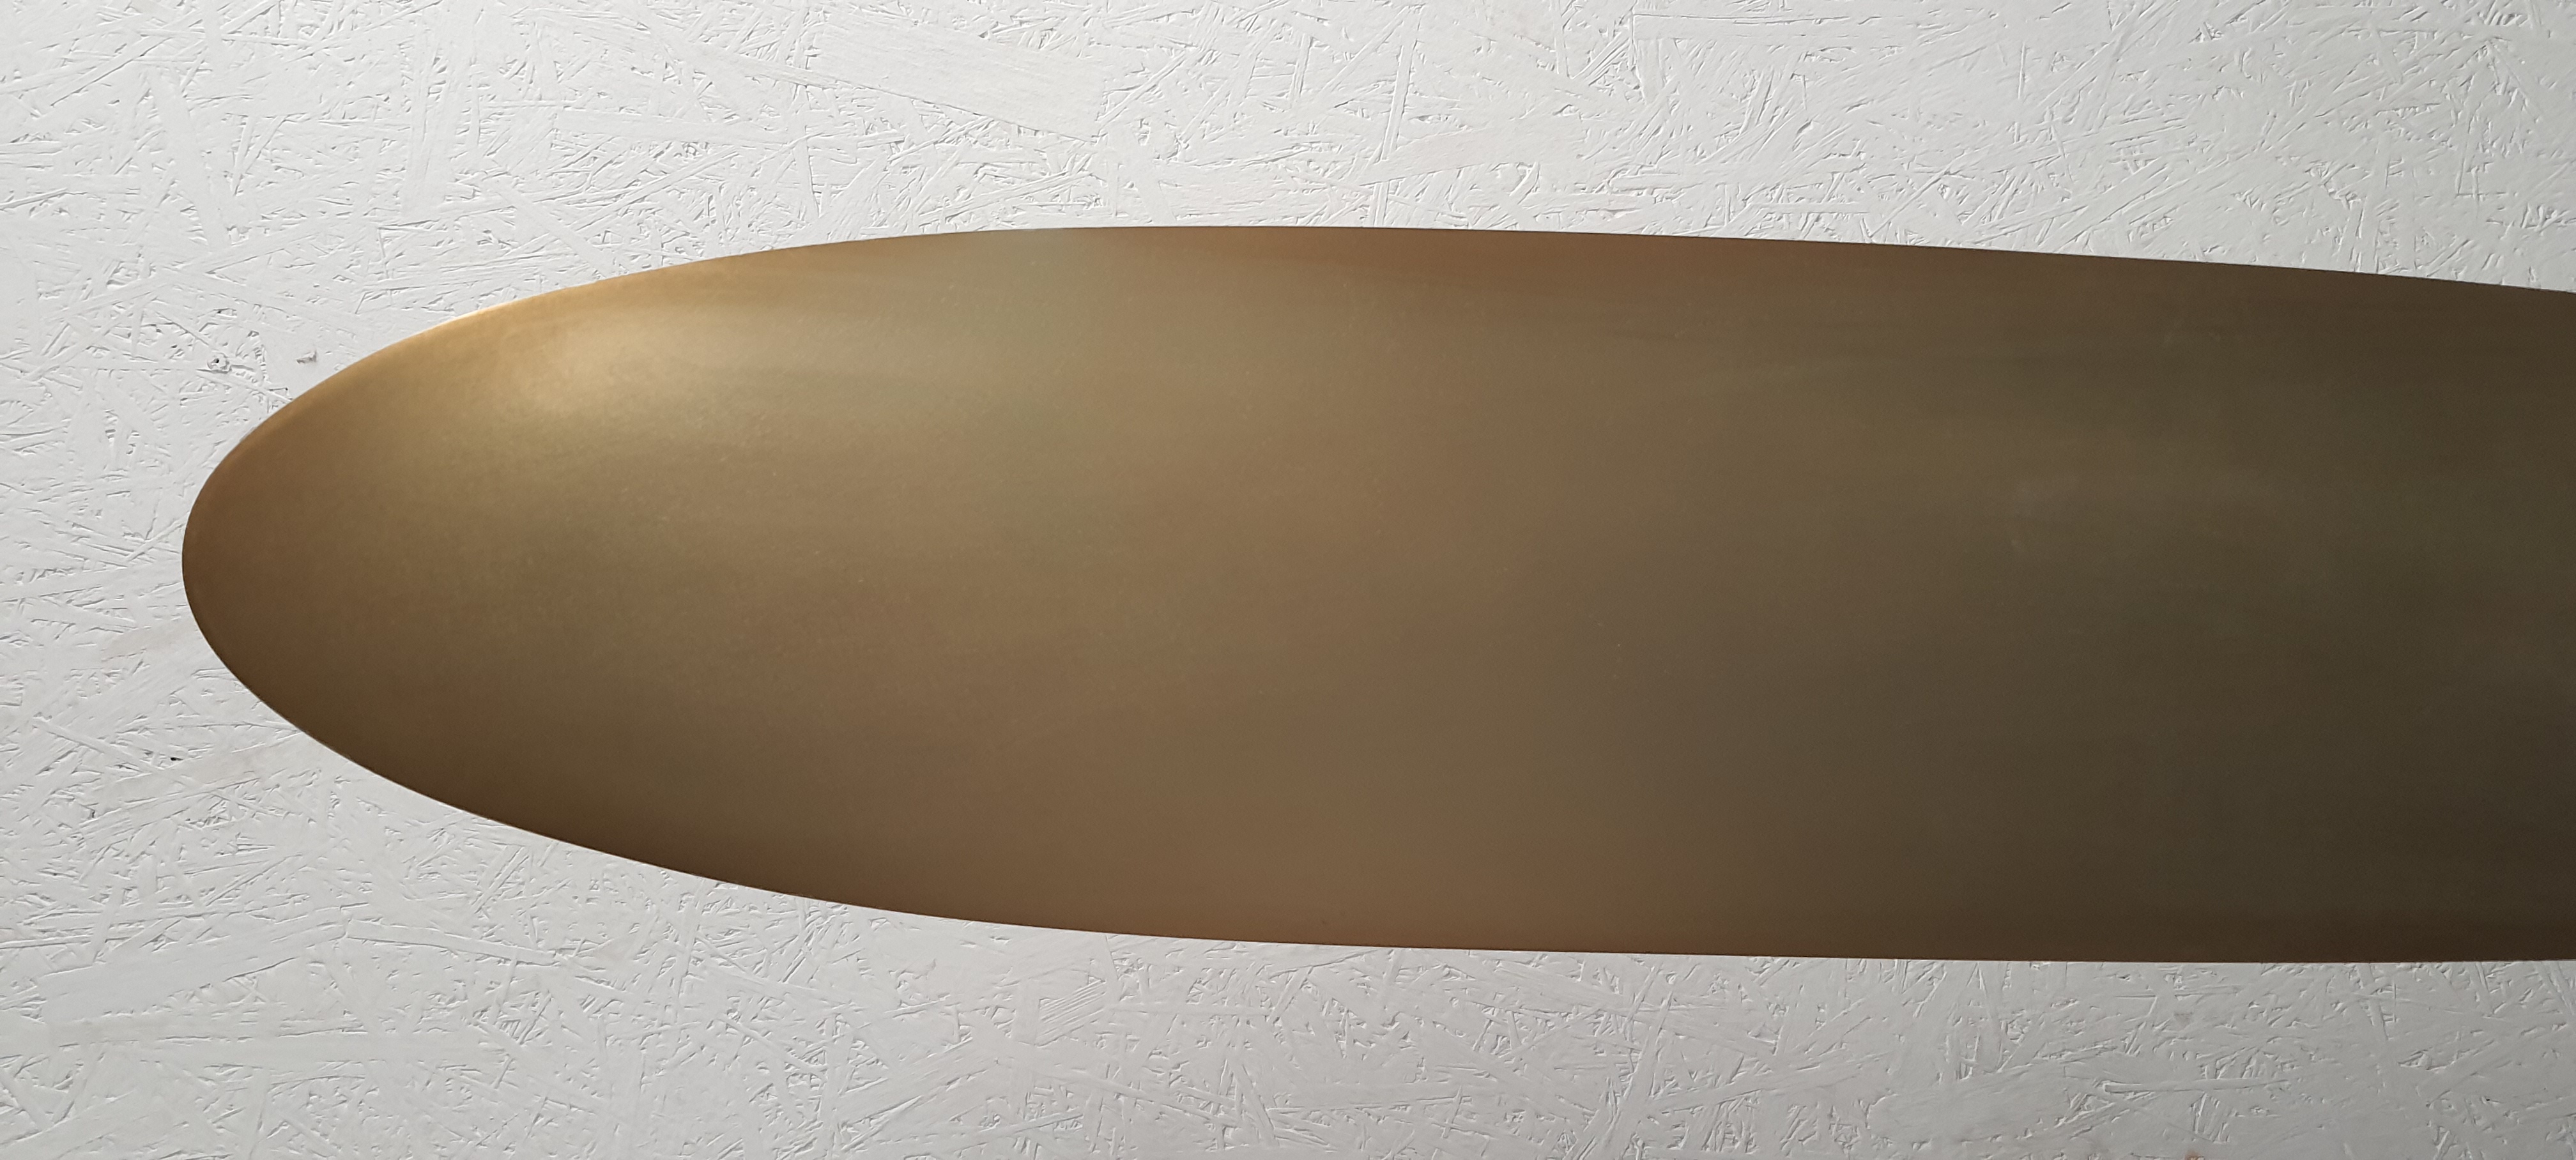 Propeller after surface treatment with alodine and before painting - Airservices France